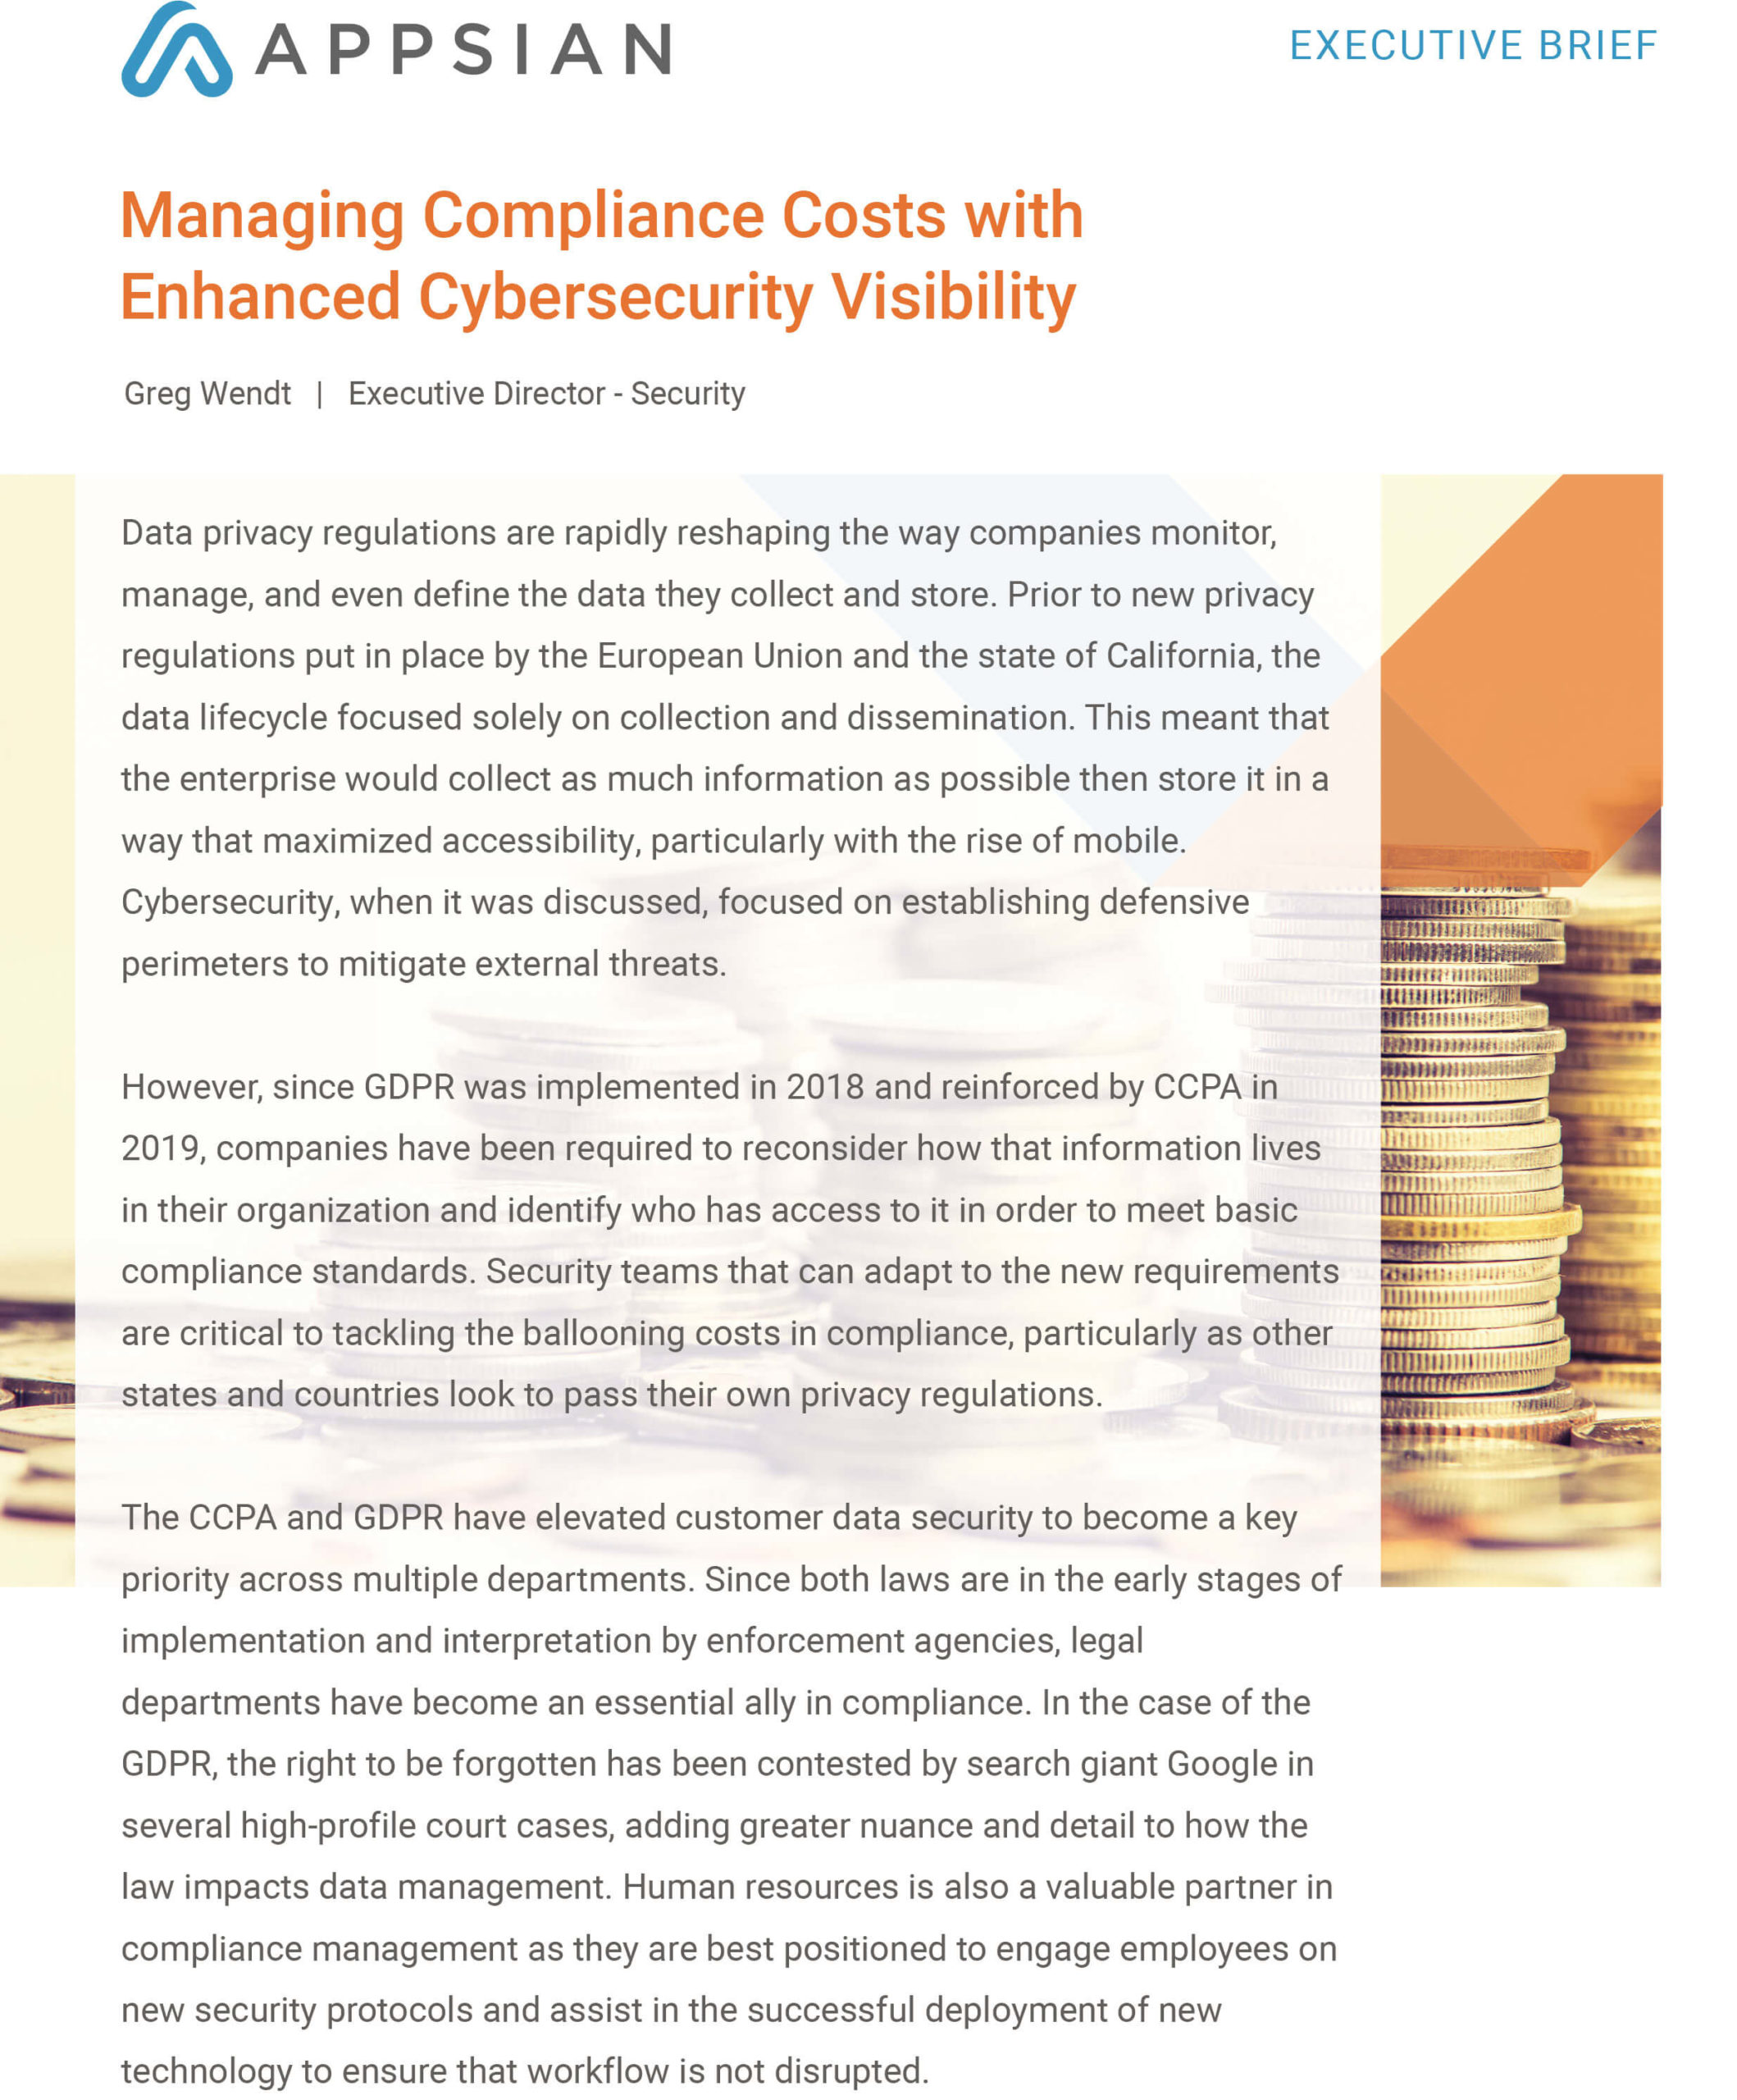 Managing Compliance Costs with Enhanced Cybersecurity Visibility